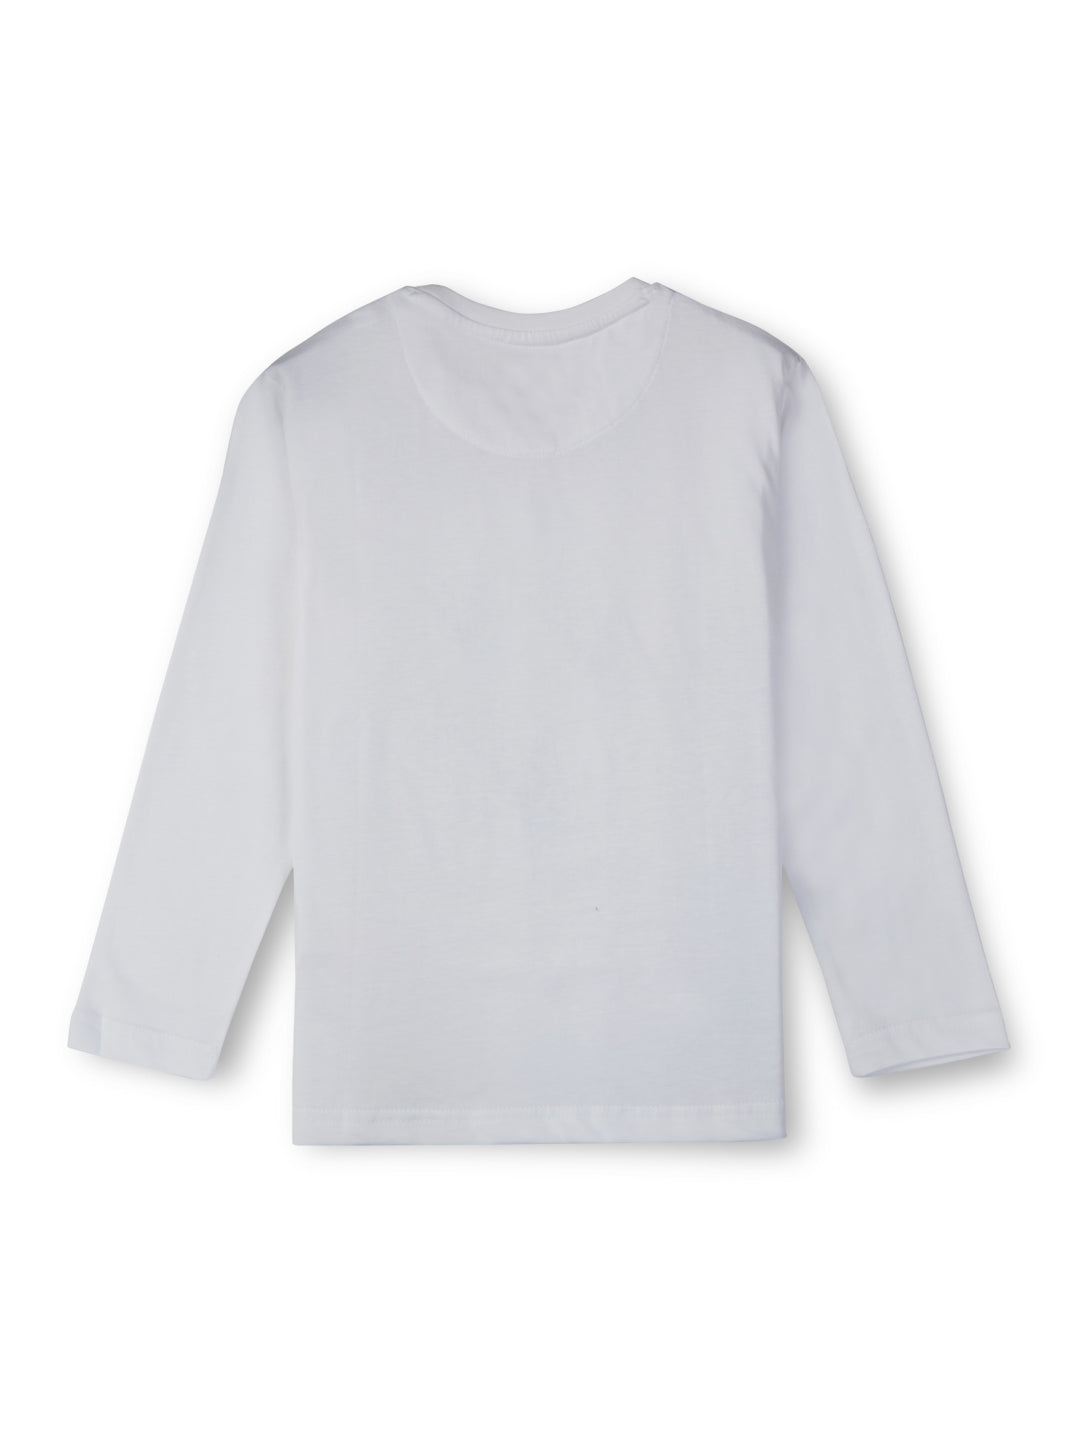 Boys white round neck knitted cotton printed t-shirt.